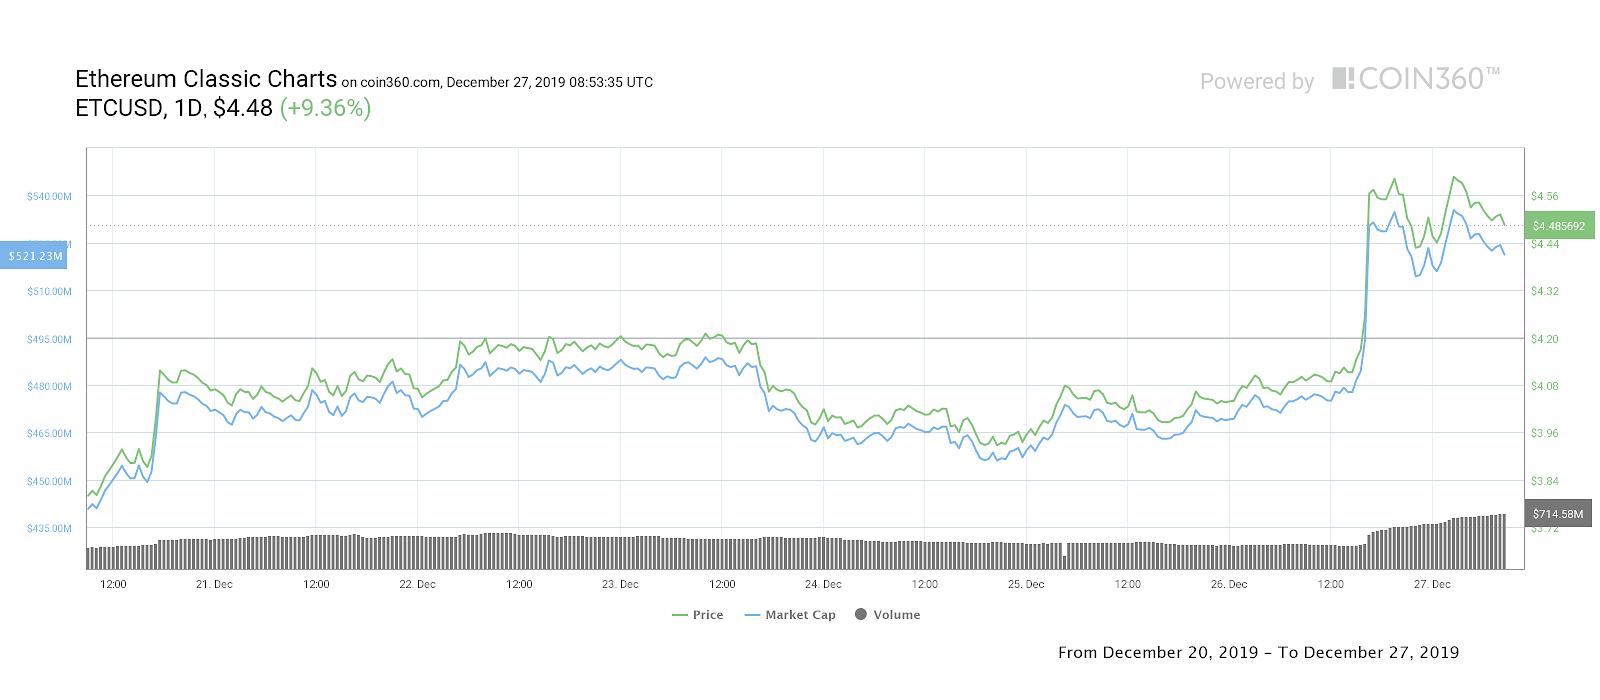 Ethereum Classic 7-day price chart